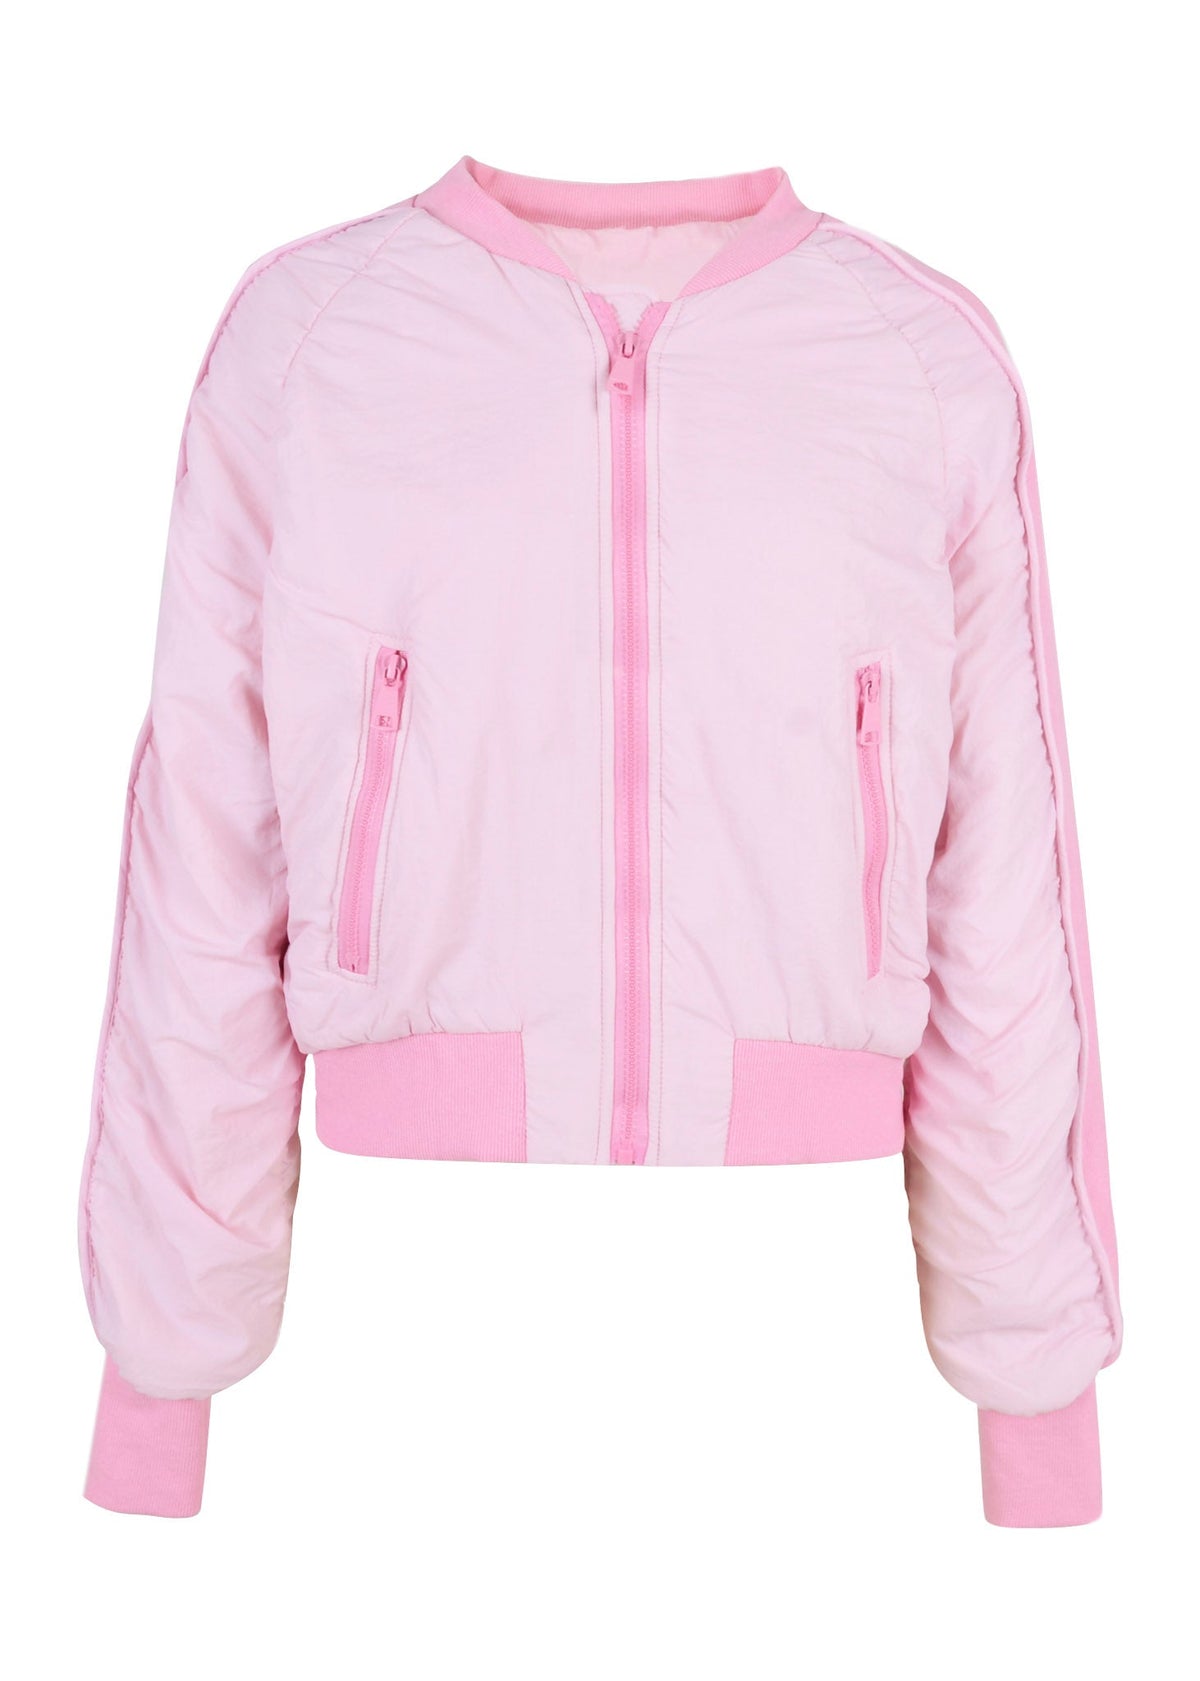 Two Tone Zip-Up Puffer Jacket for women